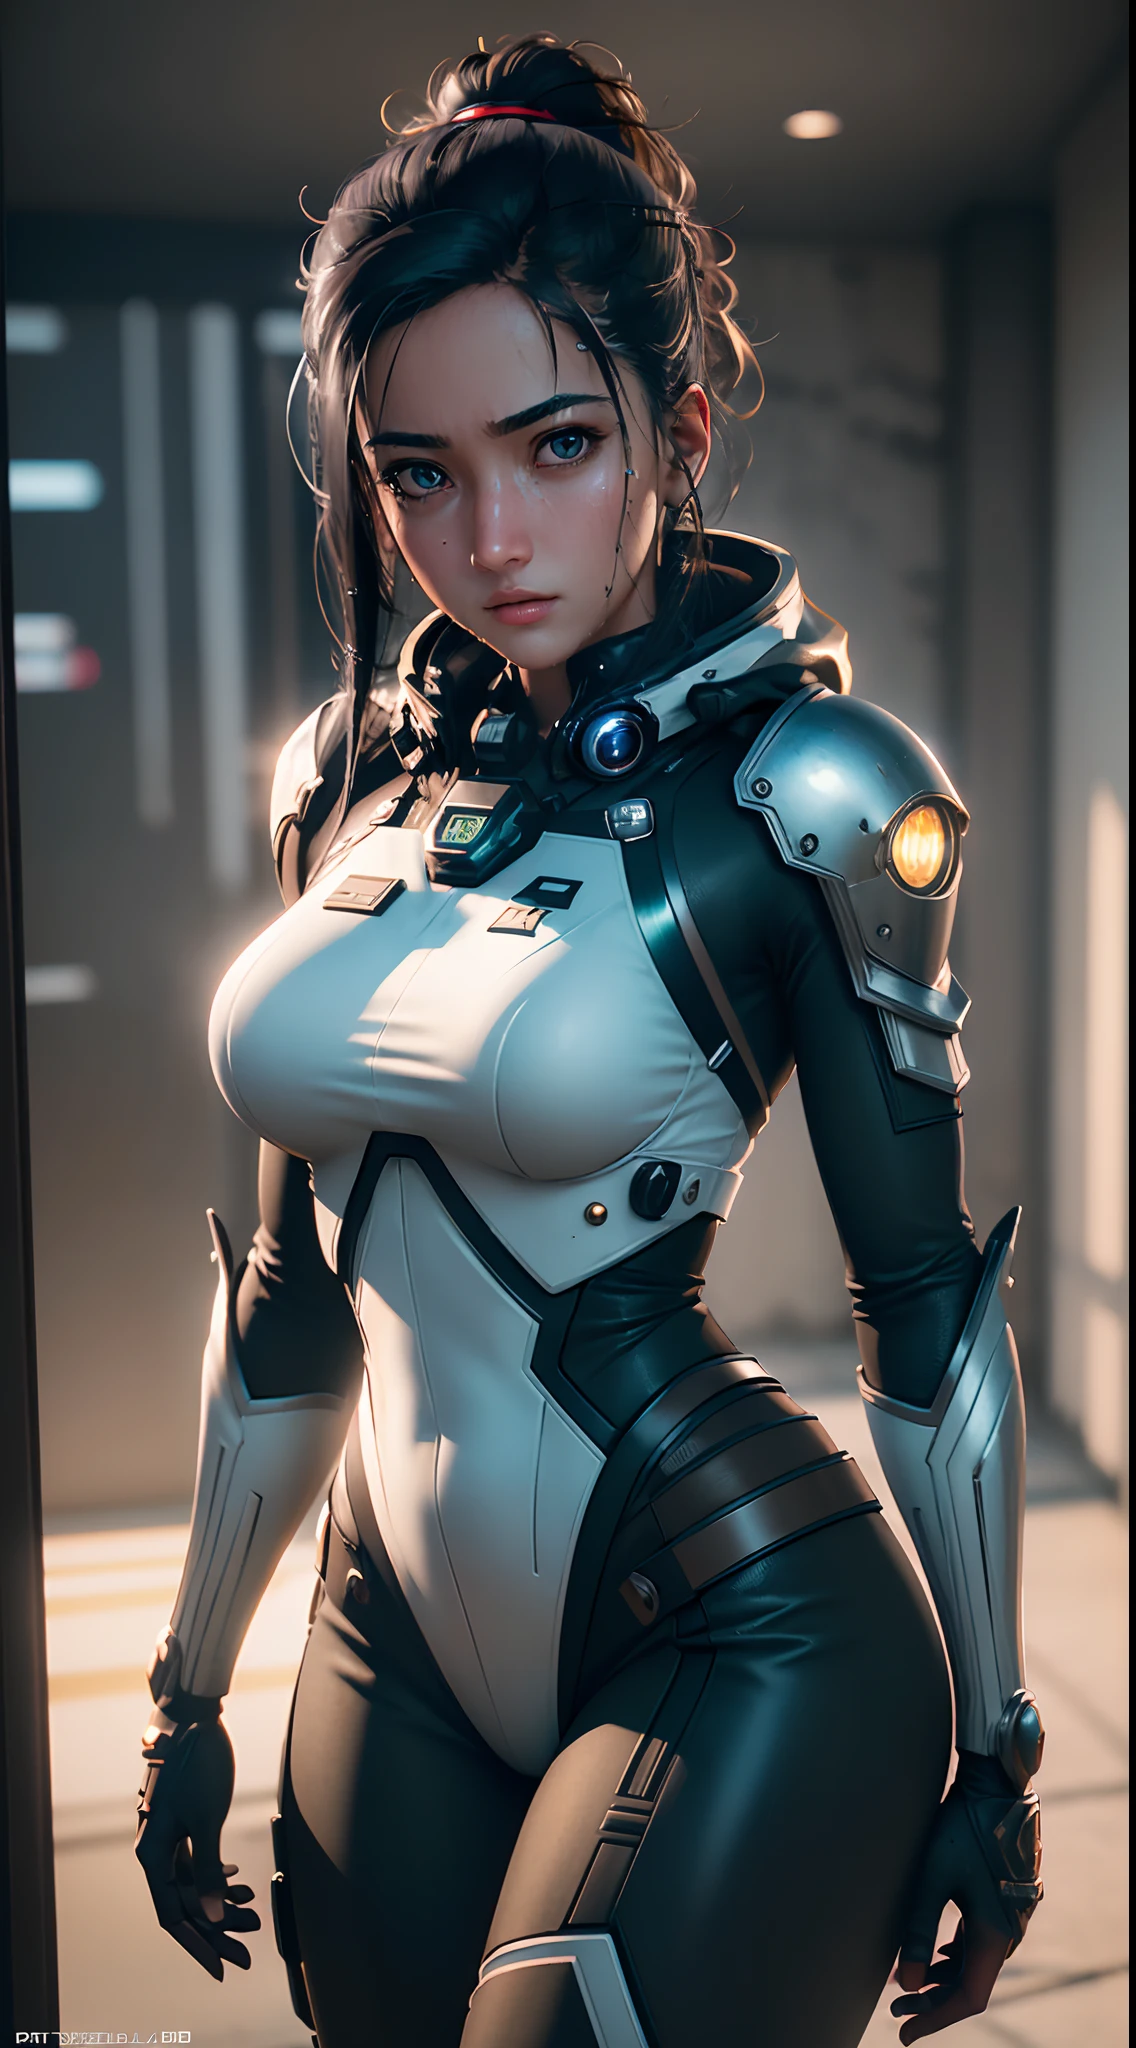 ((Best quality)), ((masterpiece)), (detailed:1.4), 3D, an image of a beautiful cyberpunk female,HDR (High Dynamic Range),Ray Tracing,NVIDIA RTX,Super-Resolution,Unreal 5,Subsurface scattering,PBR Texturing,Post-processing,Anisotropic Filtering,Depth-of-field,Maximum clarity and sharpness,Multi-layered textures,Albedo and Specular maps,Surface shading,Accurate simulation of light-material interaction,Perfect proportions,Octane Render,Two-tone lighting,Wide aperture,Low ISO,White balance,Rule of thirds,8K RAW, shining out fit, swety outfit,